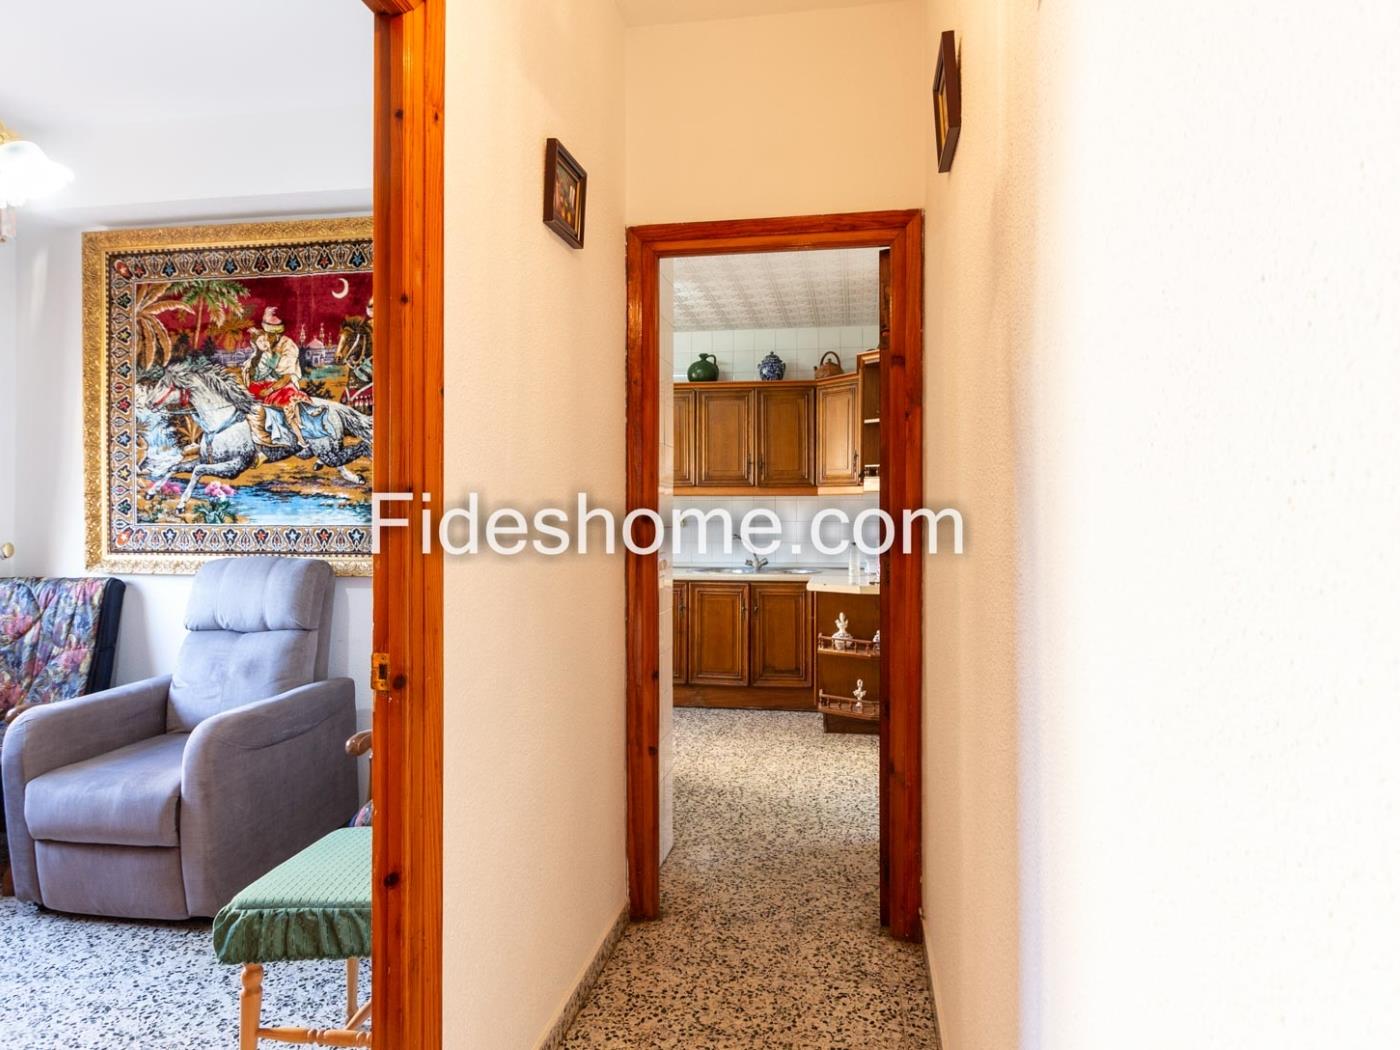 Townhouse with garage, terrace, and views in Albuñuelas. in Albuñuelas